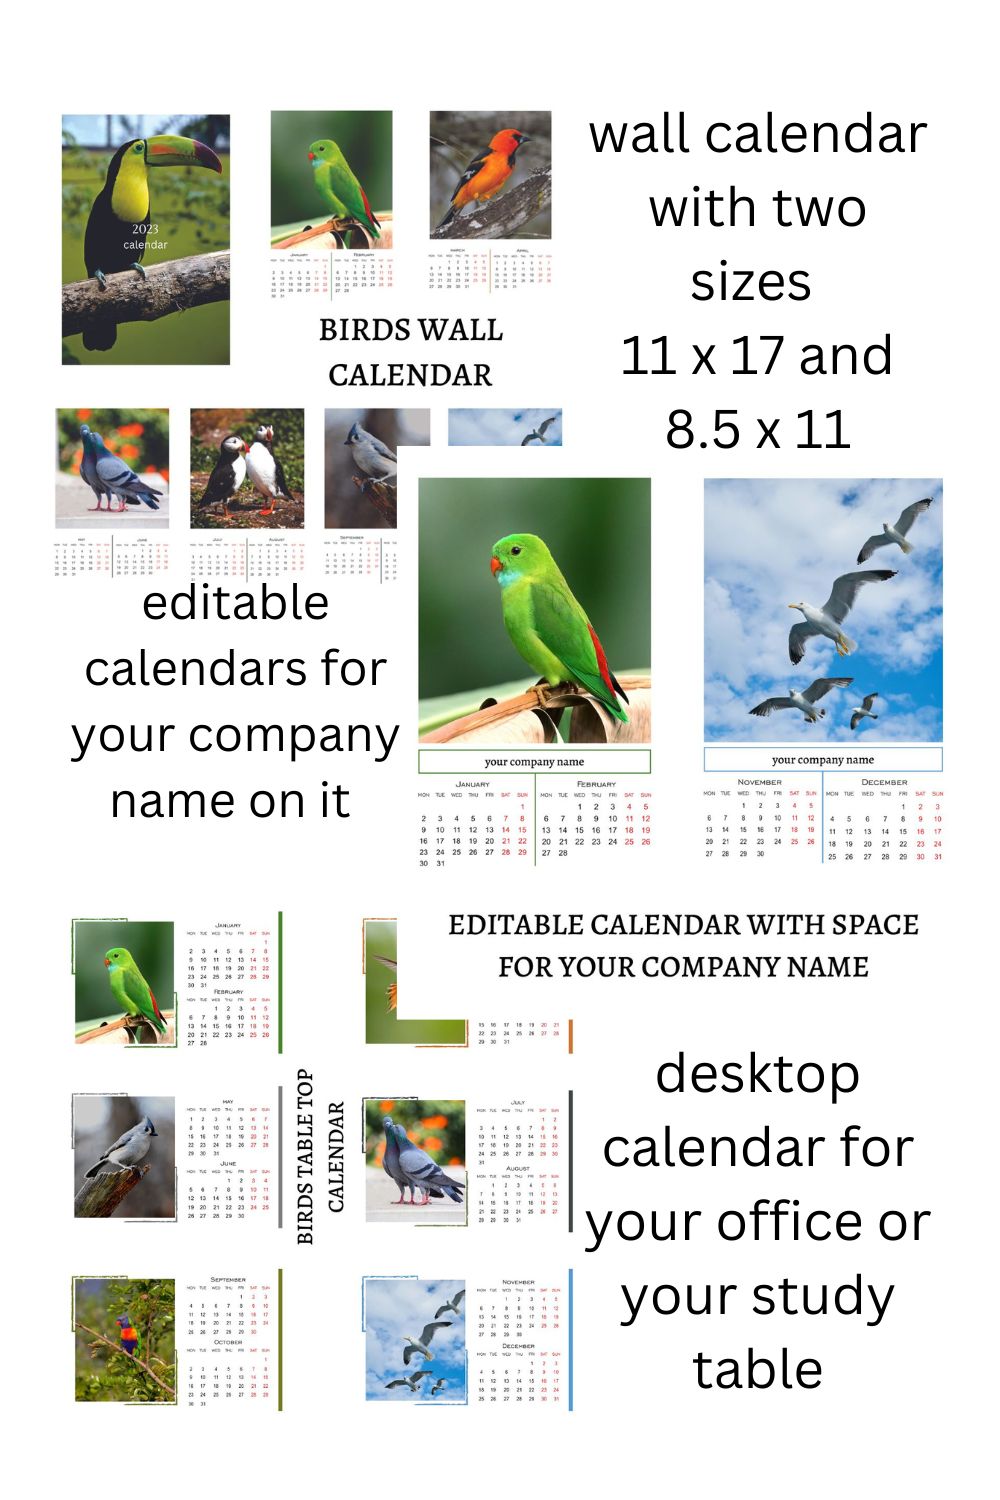 Wall calendar with two sizes 11 x 17 and 8.5 x 11.